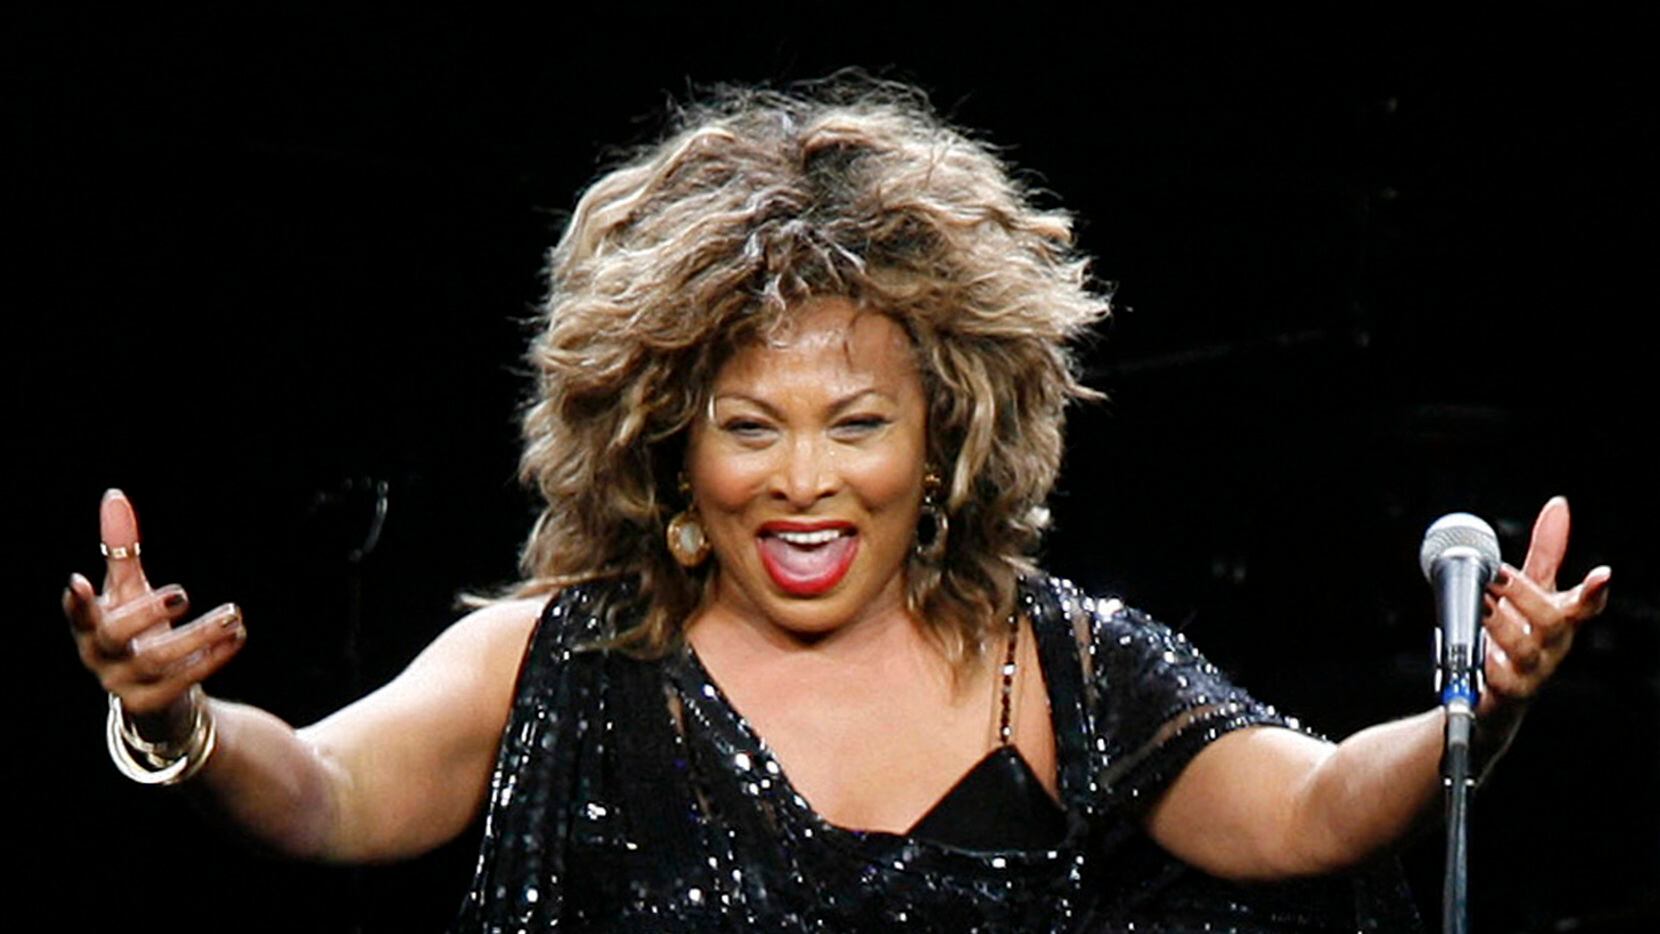 Tina Turner performs in a concert in Cologne, Germany on Jan. 14, 2009. Turner, the...